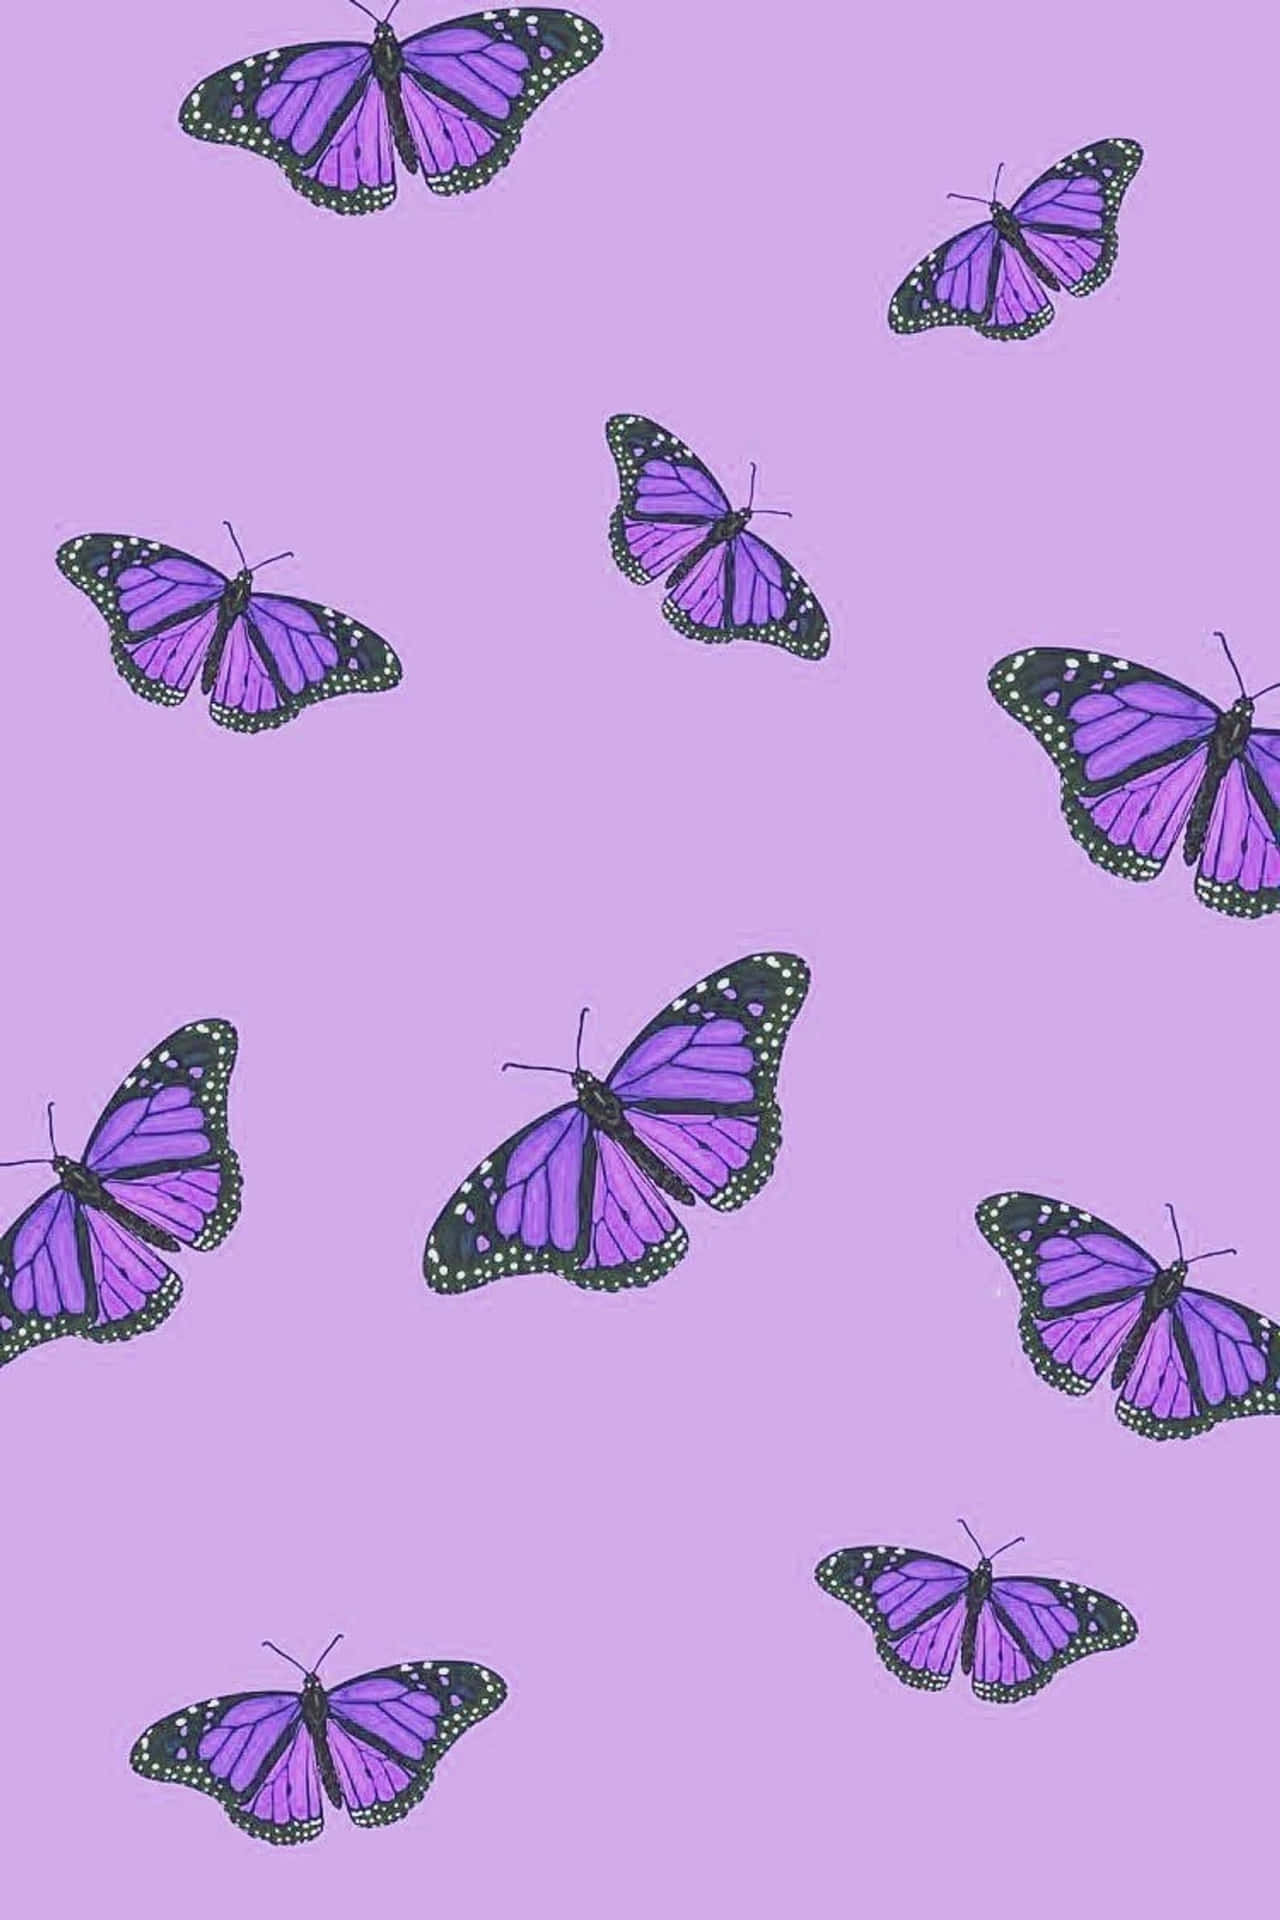 A Vibrant, Purple Butterfly With Beautiful Wings. Wallpaper